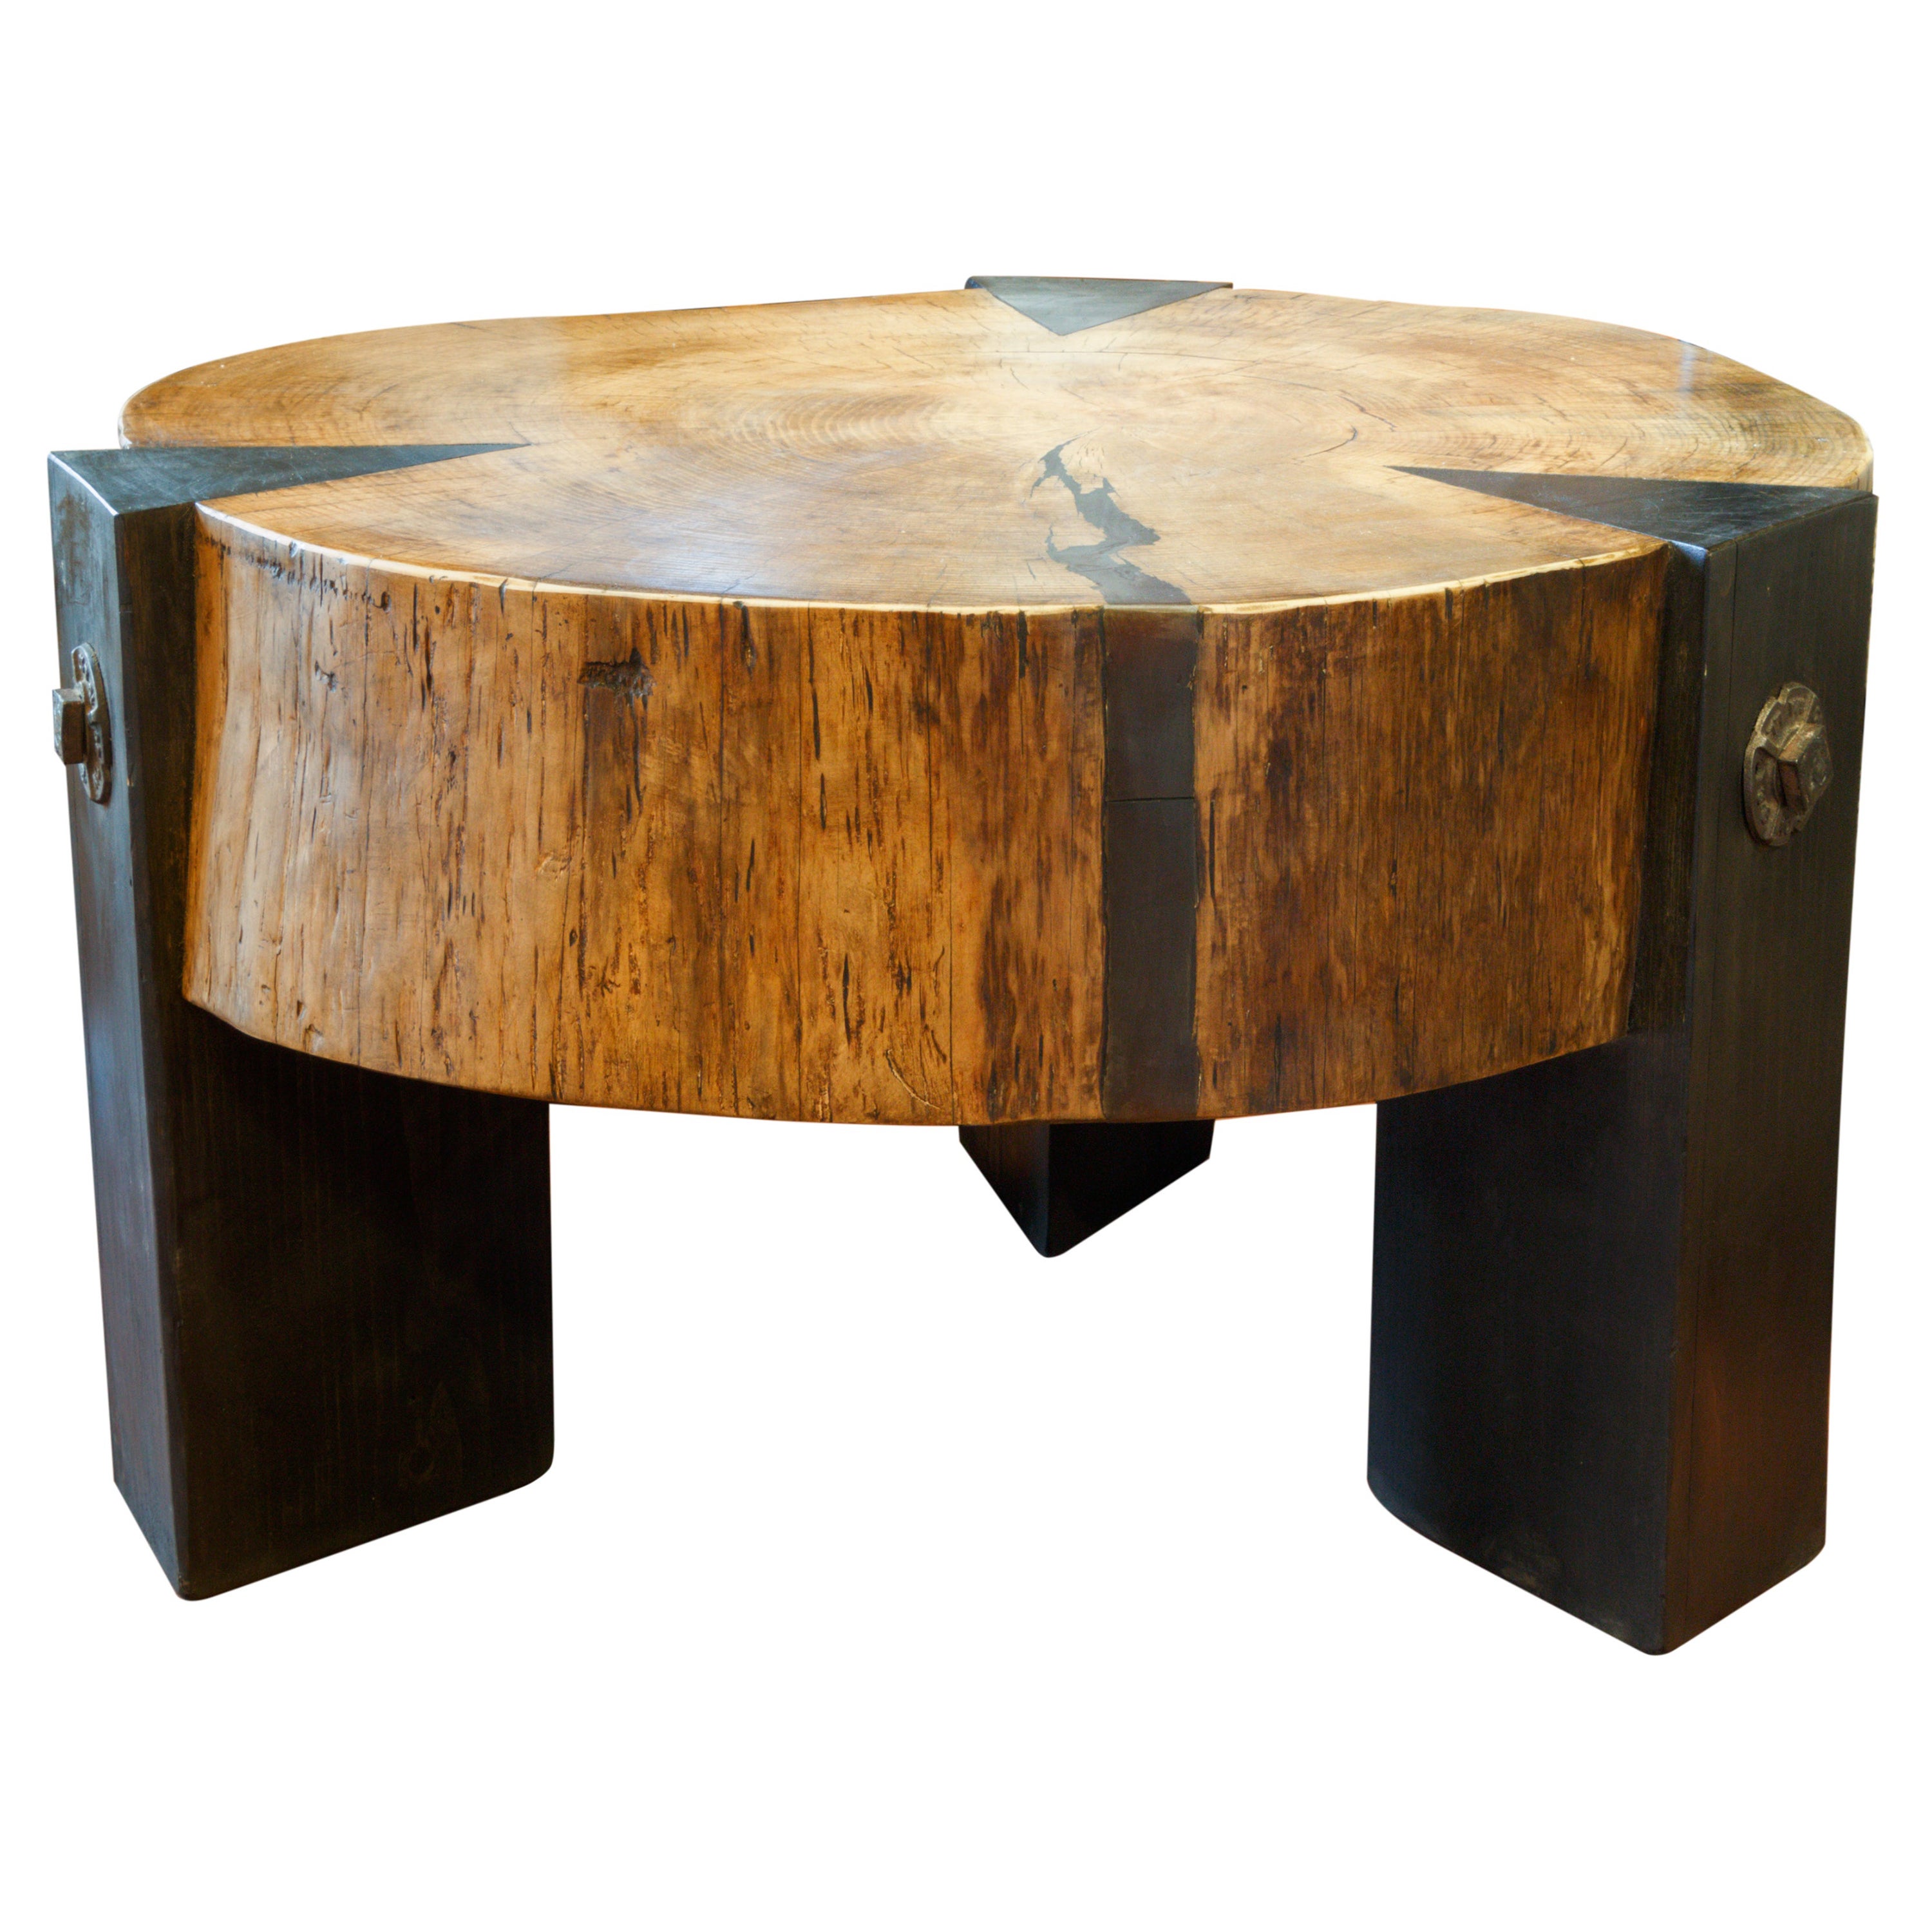 Rugged Industrial Coffee Table For Sale